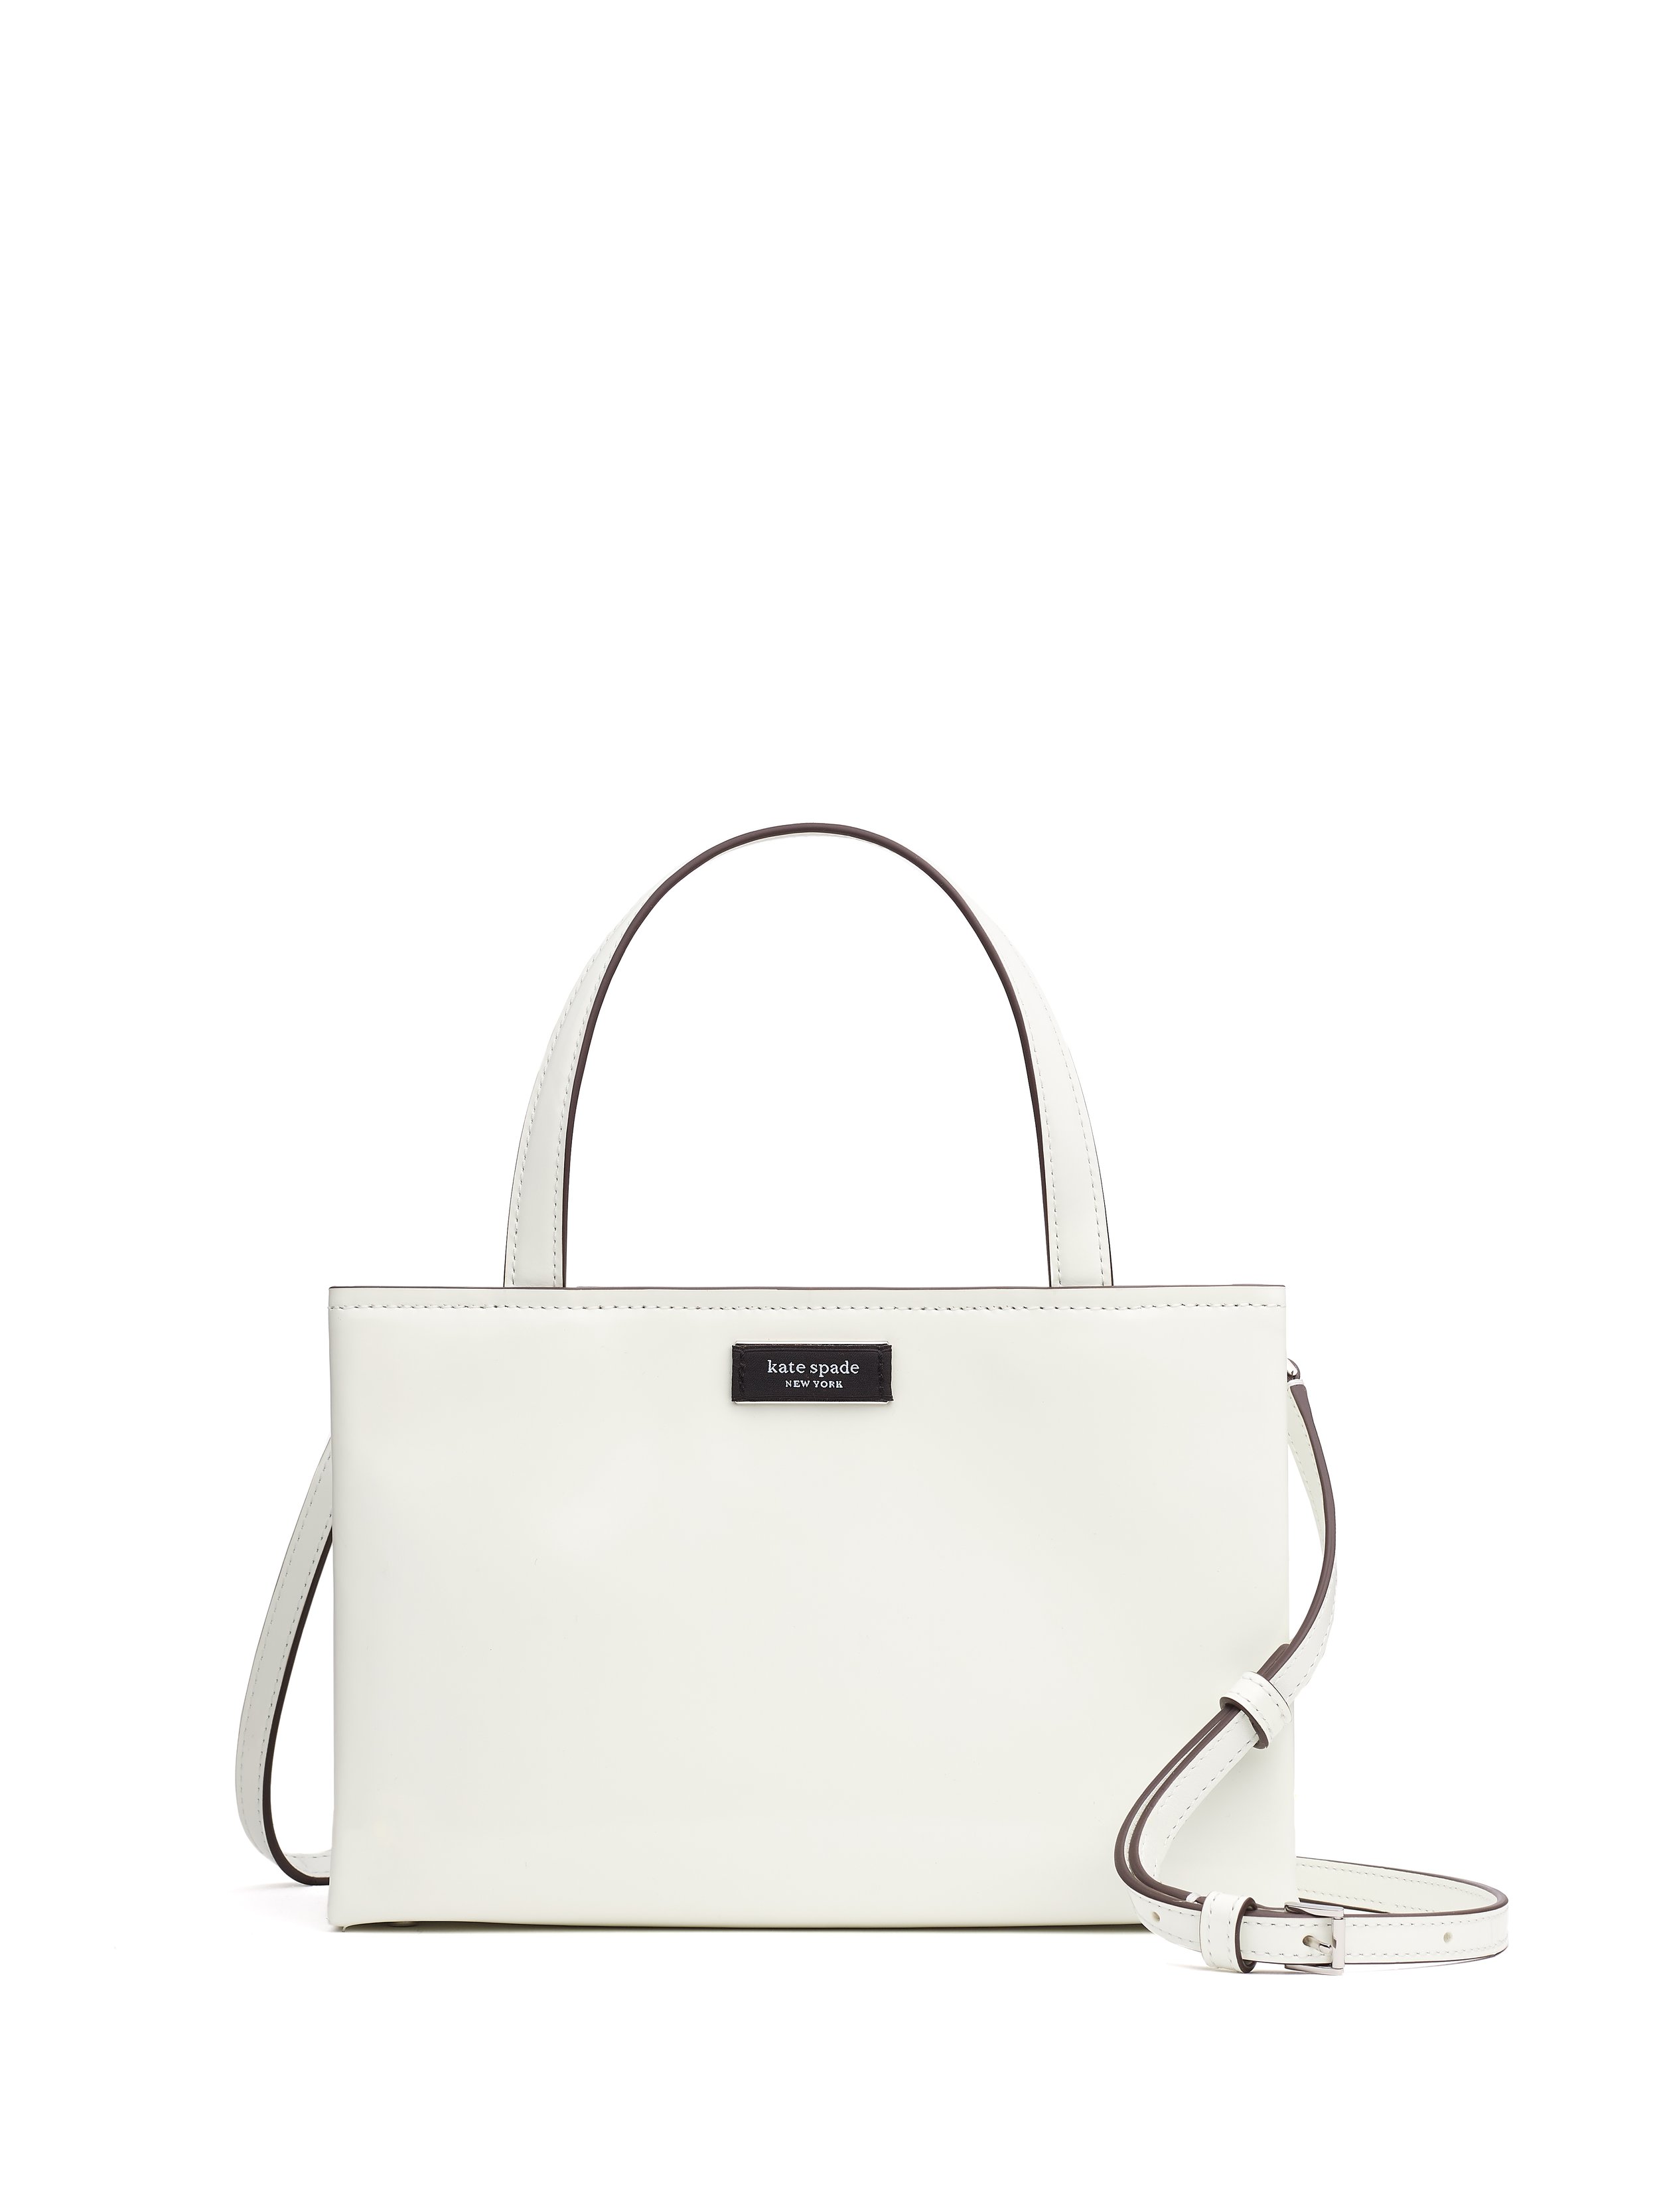 Kate Spade New York Reimagines Original Sam Bag For Fall 2022 With A Fresh  Take On An Iconic Style — SSI Life